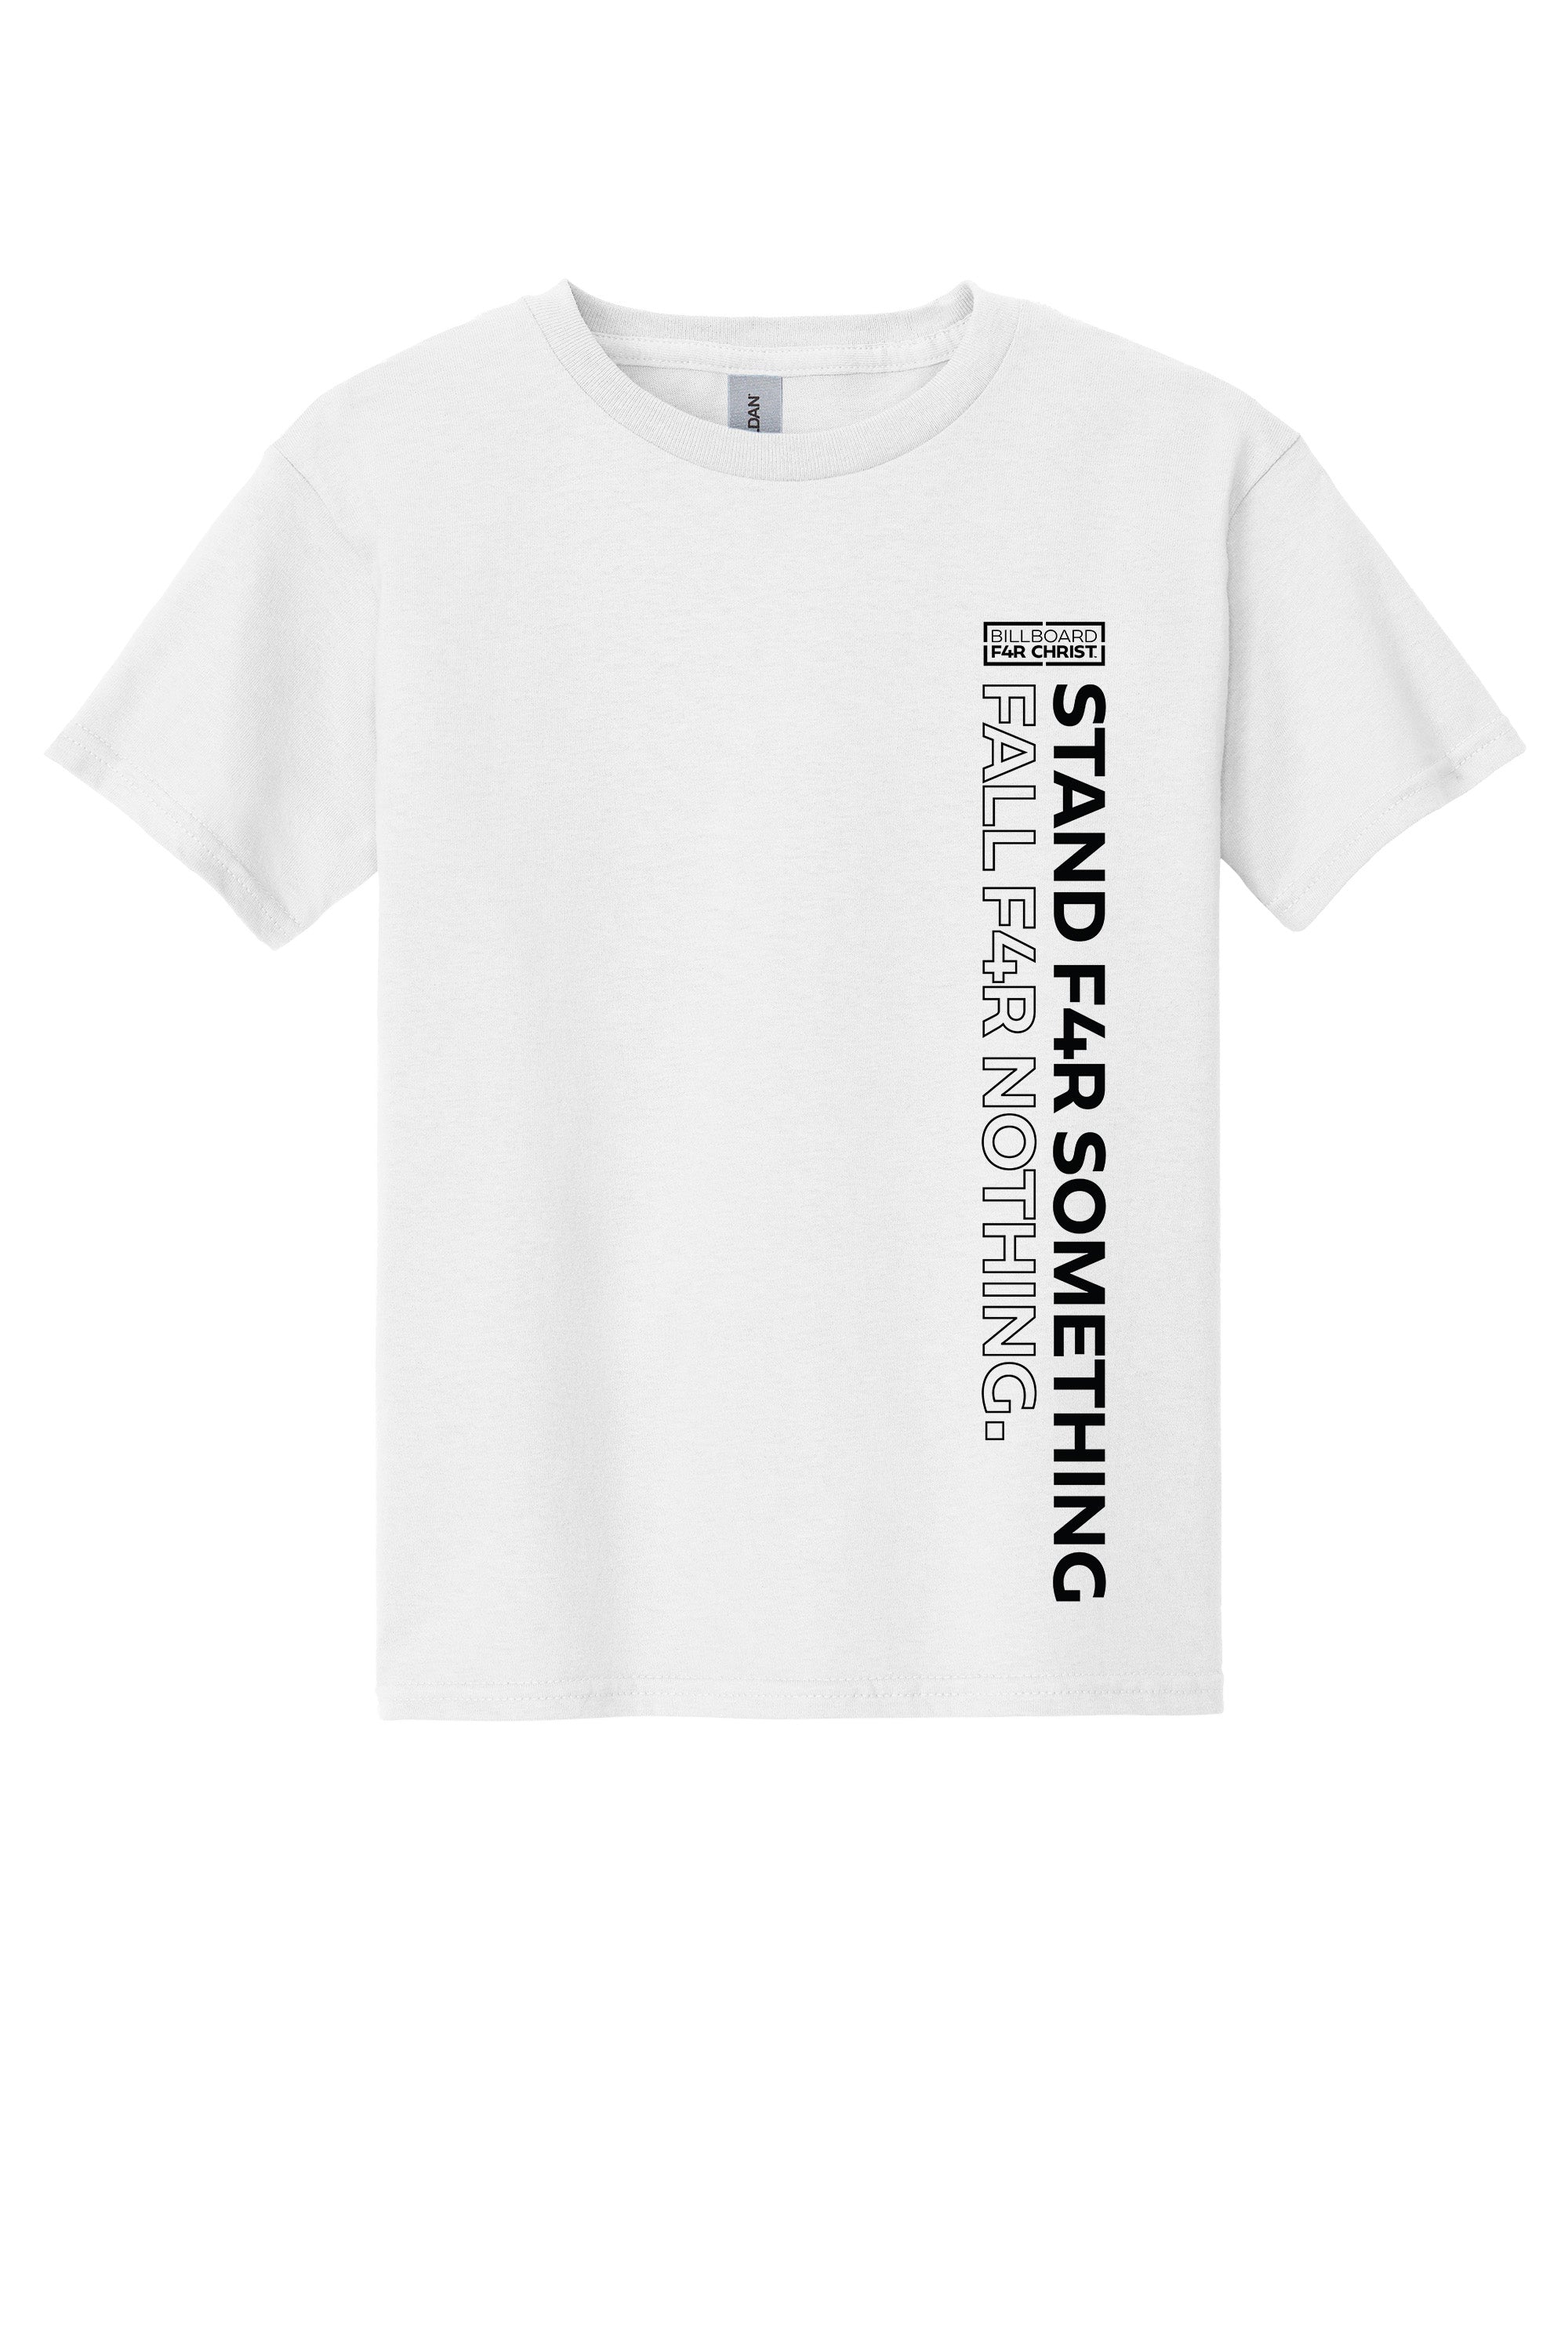 Stand F4R Something Youth T-Shirt